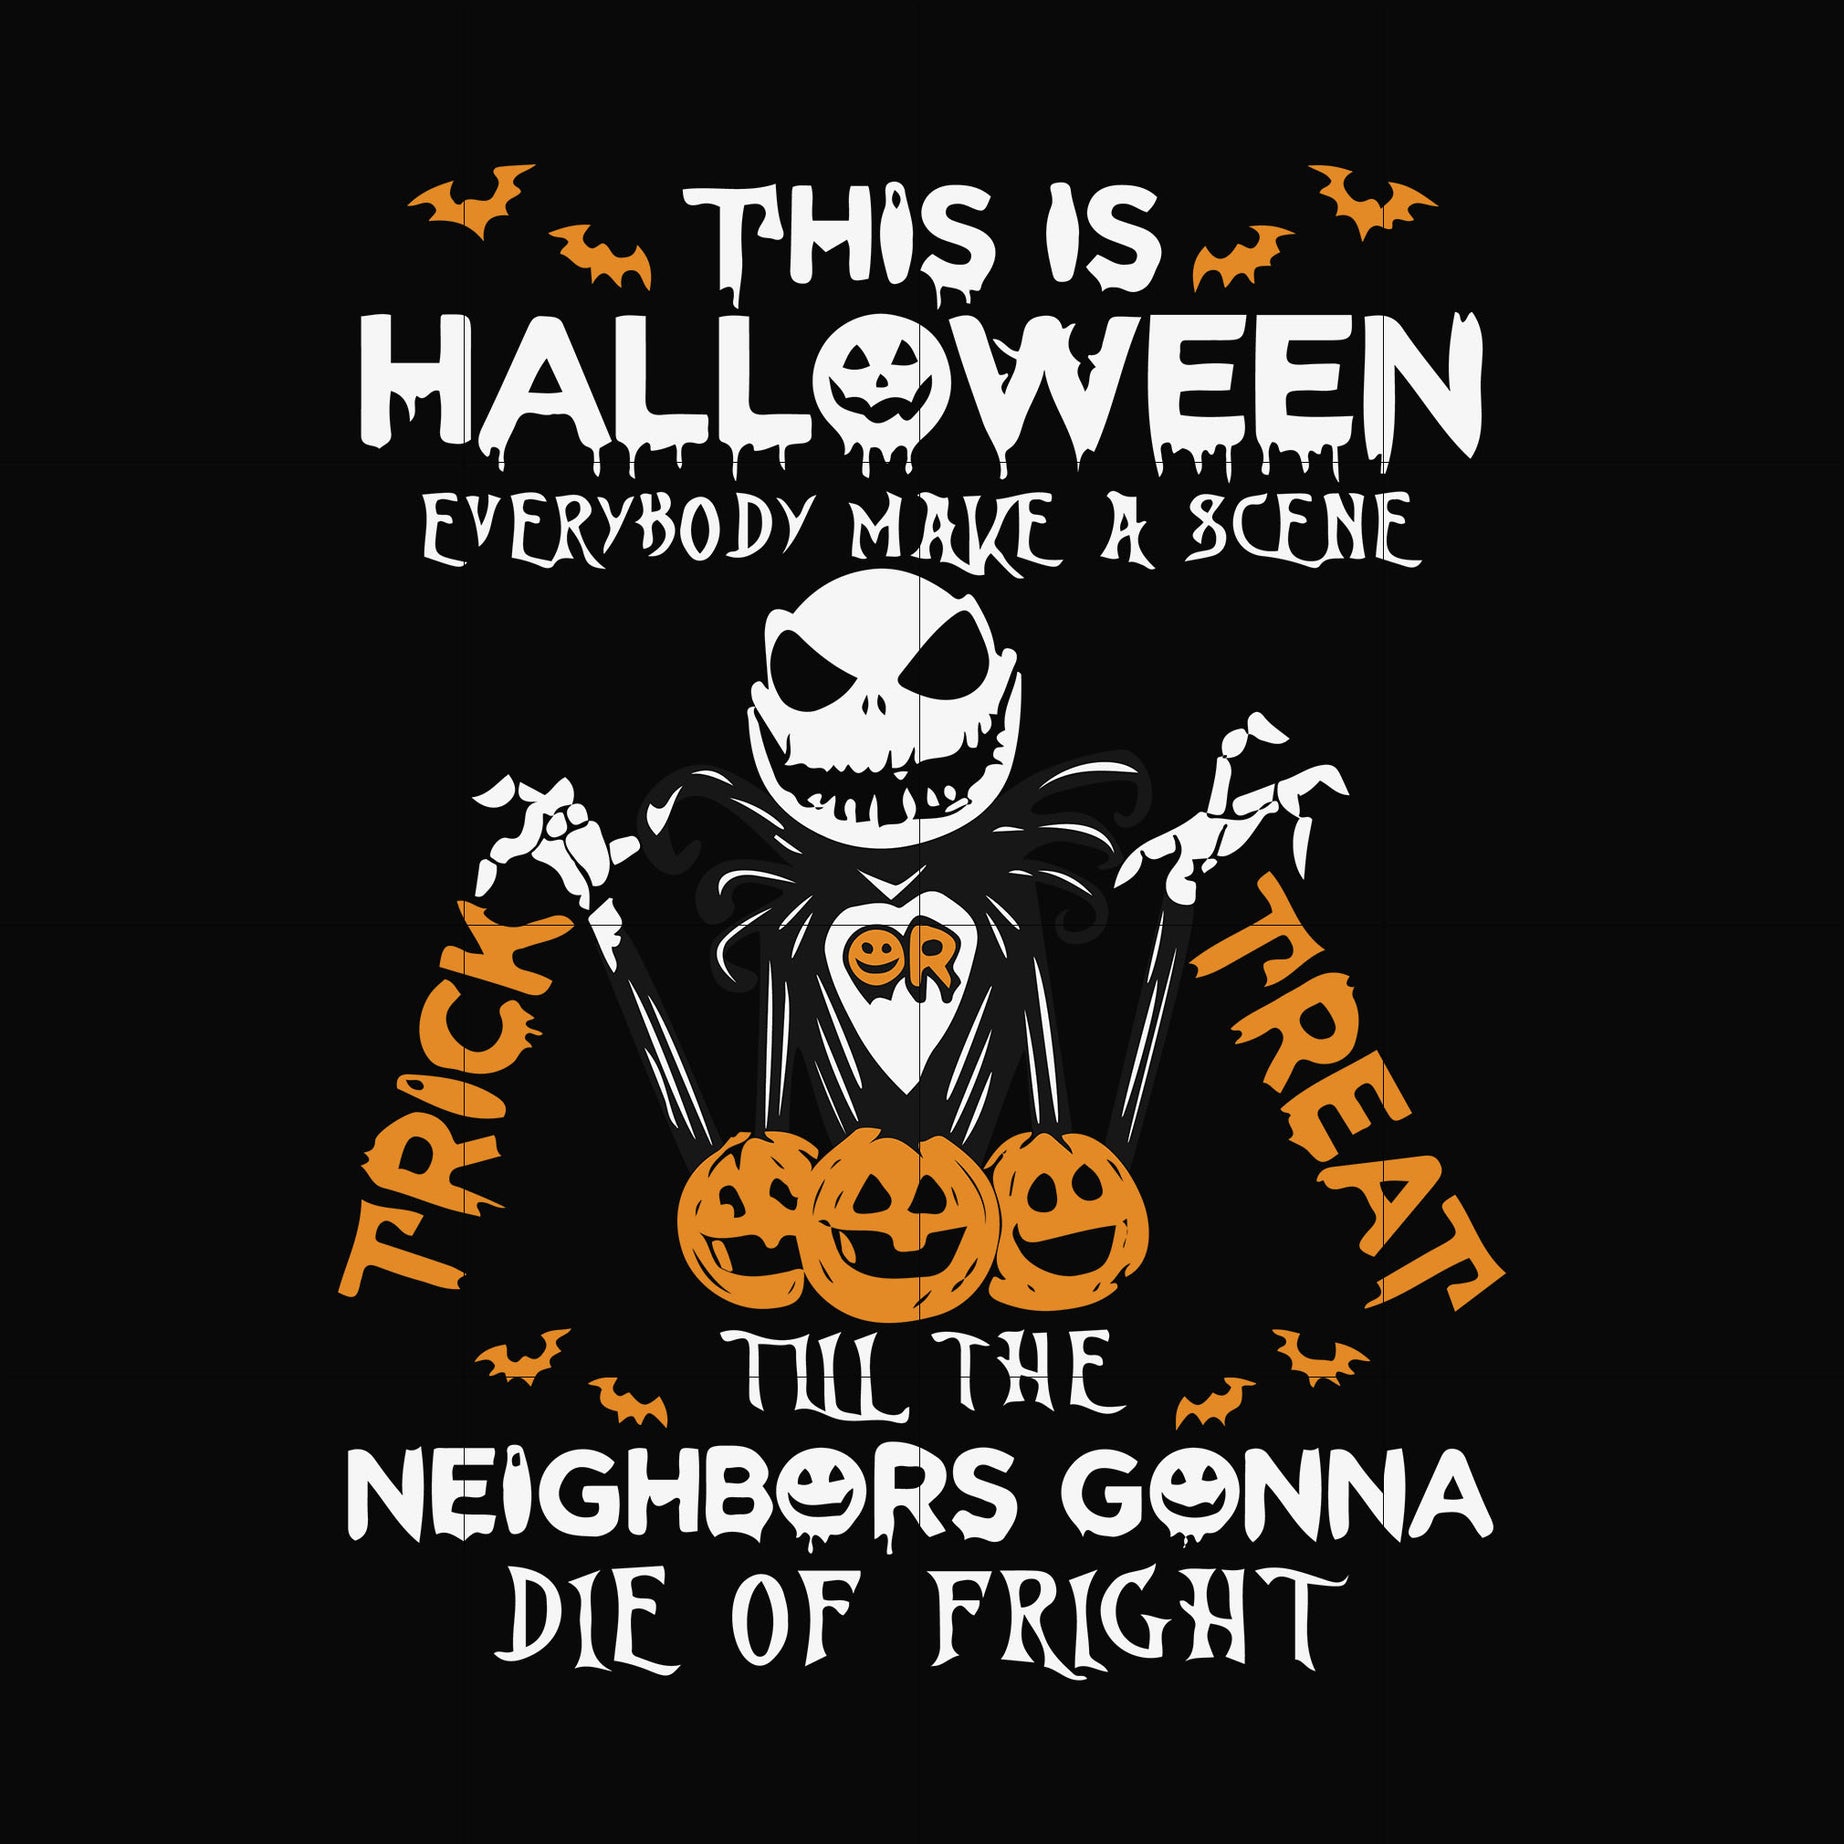 This is Halloween everybody make a scena till the neighbors gonna die of fright svg, halloween svg, png, dxf, eps digital file HWL22072029